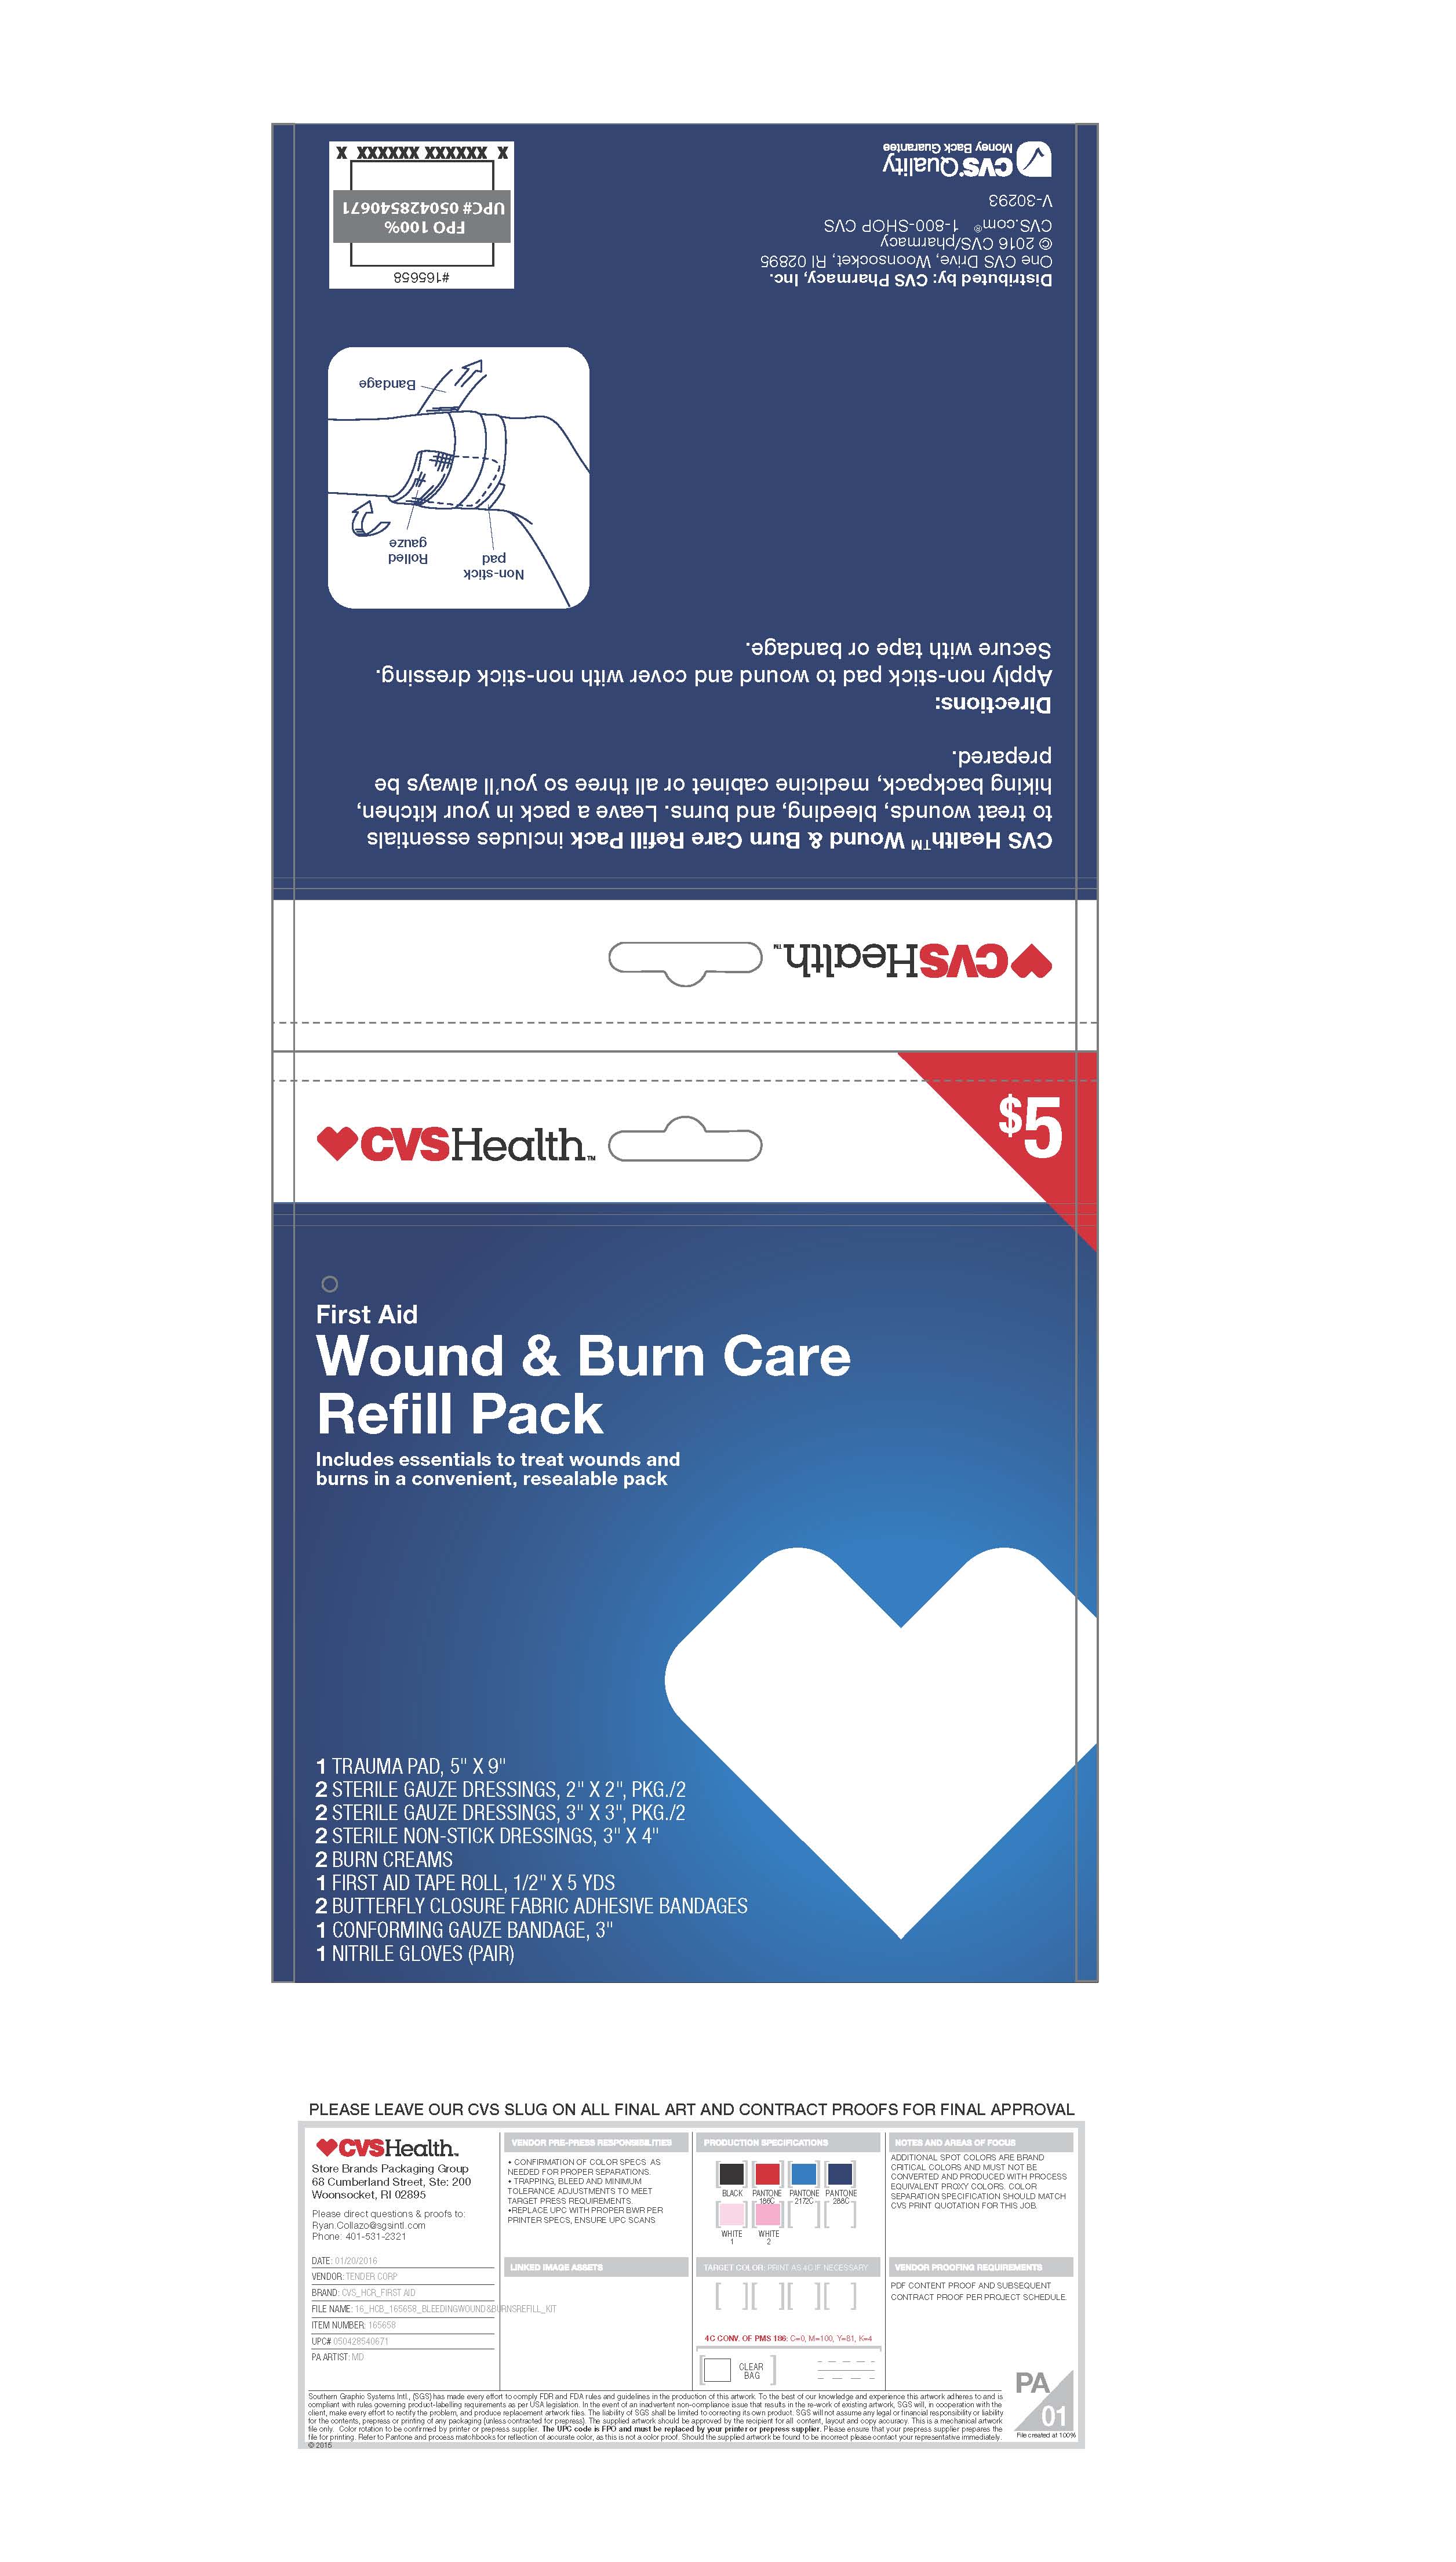 Wound and Burn Care